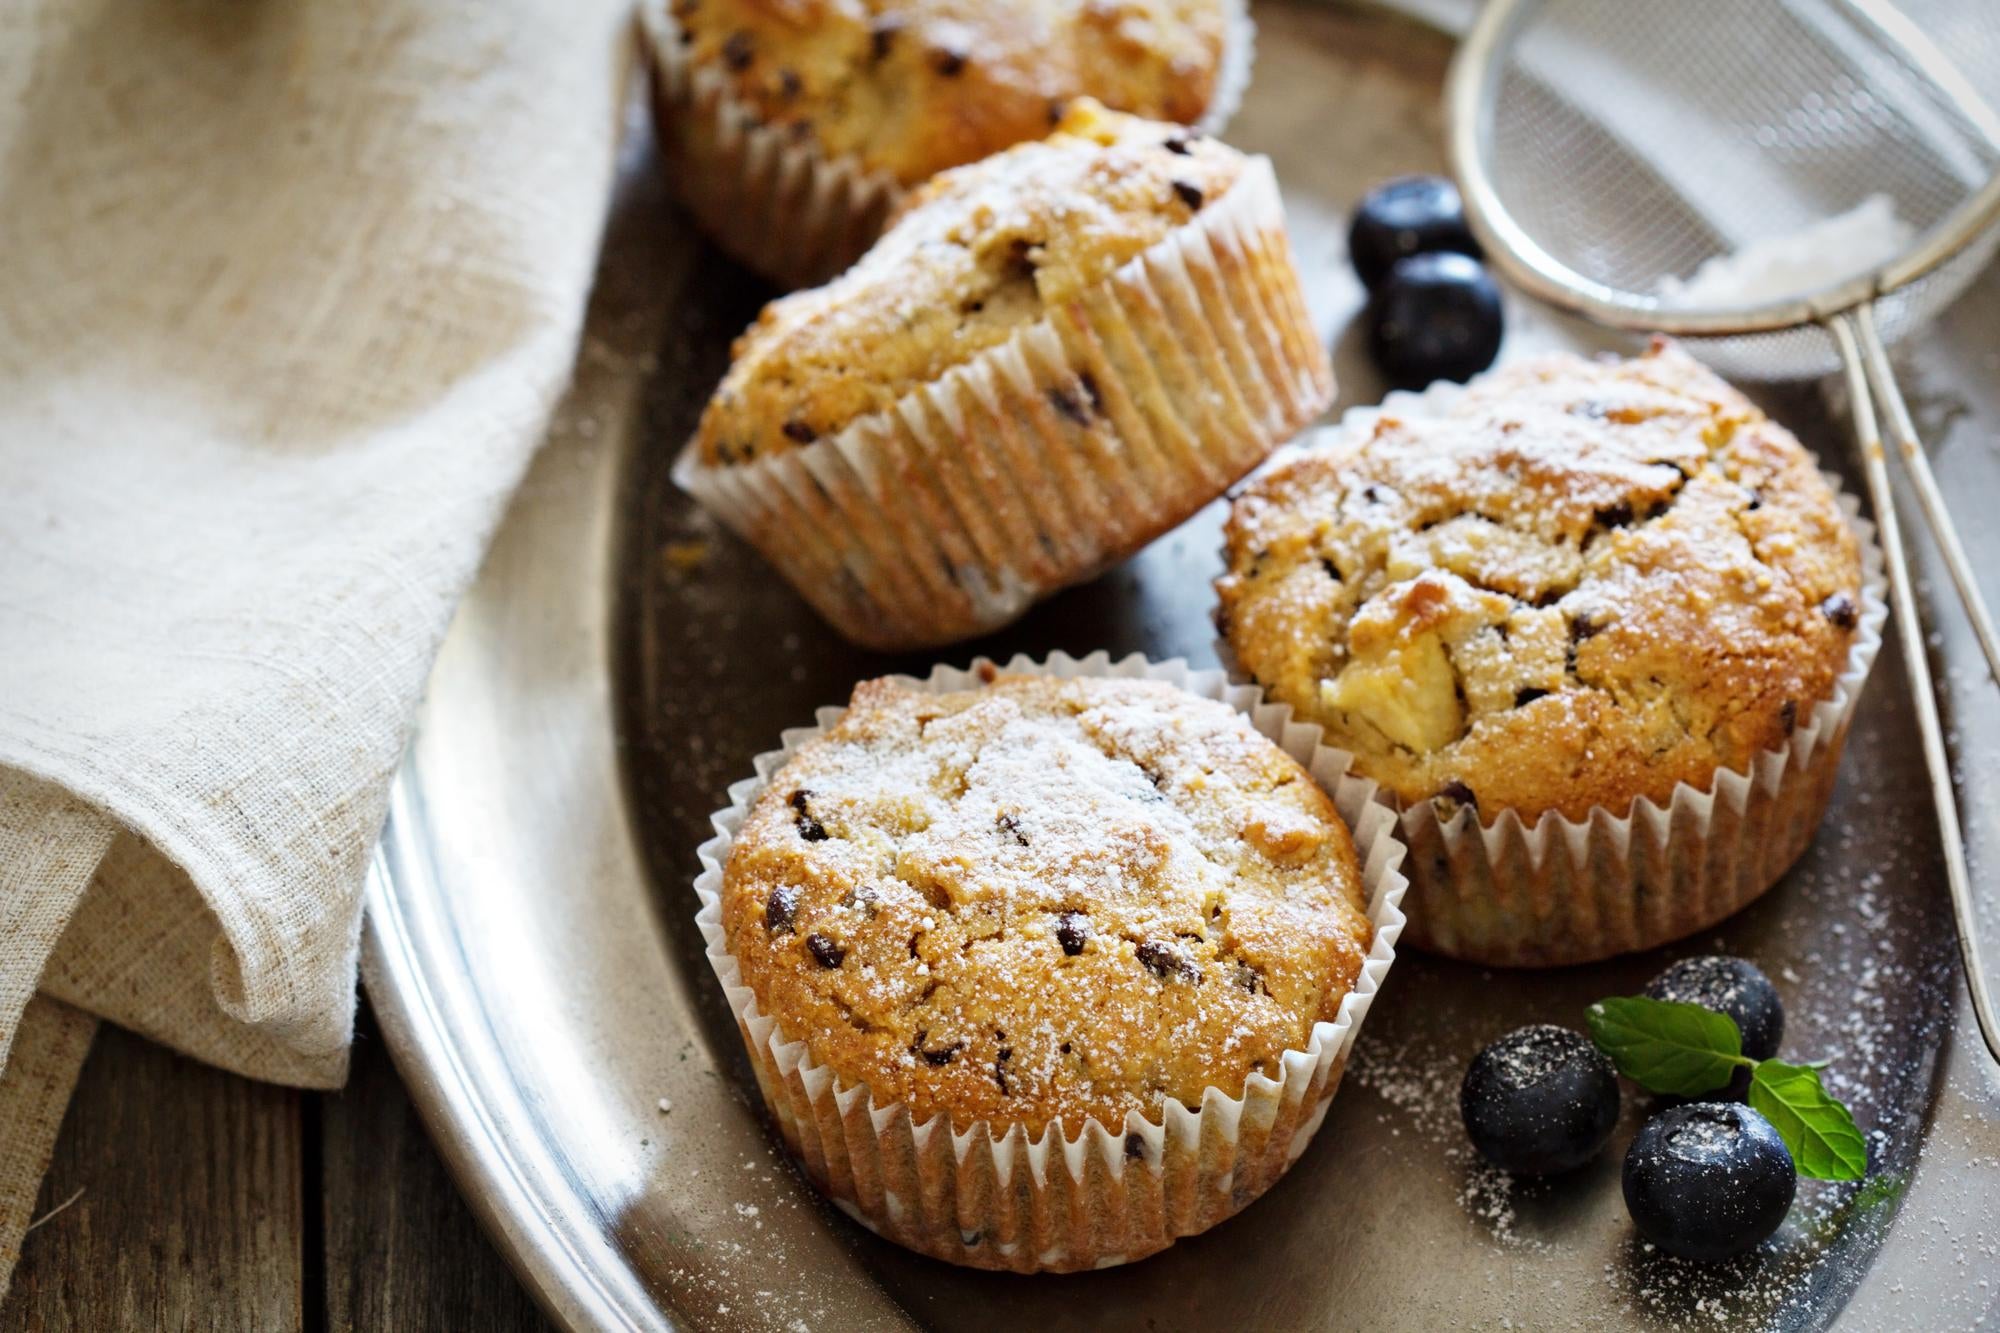 Coconut Flour and Blueberries: A Perfect Muffin Combination